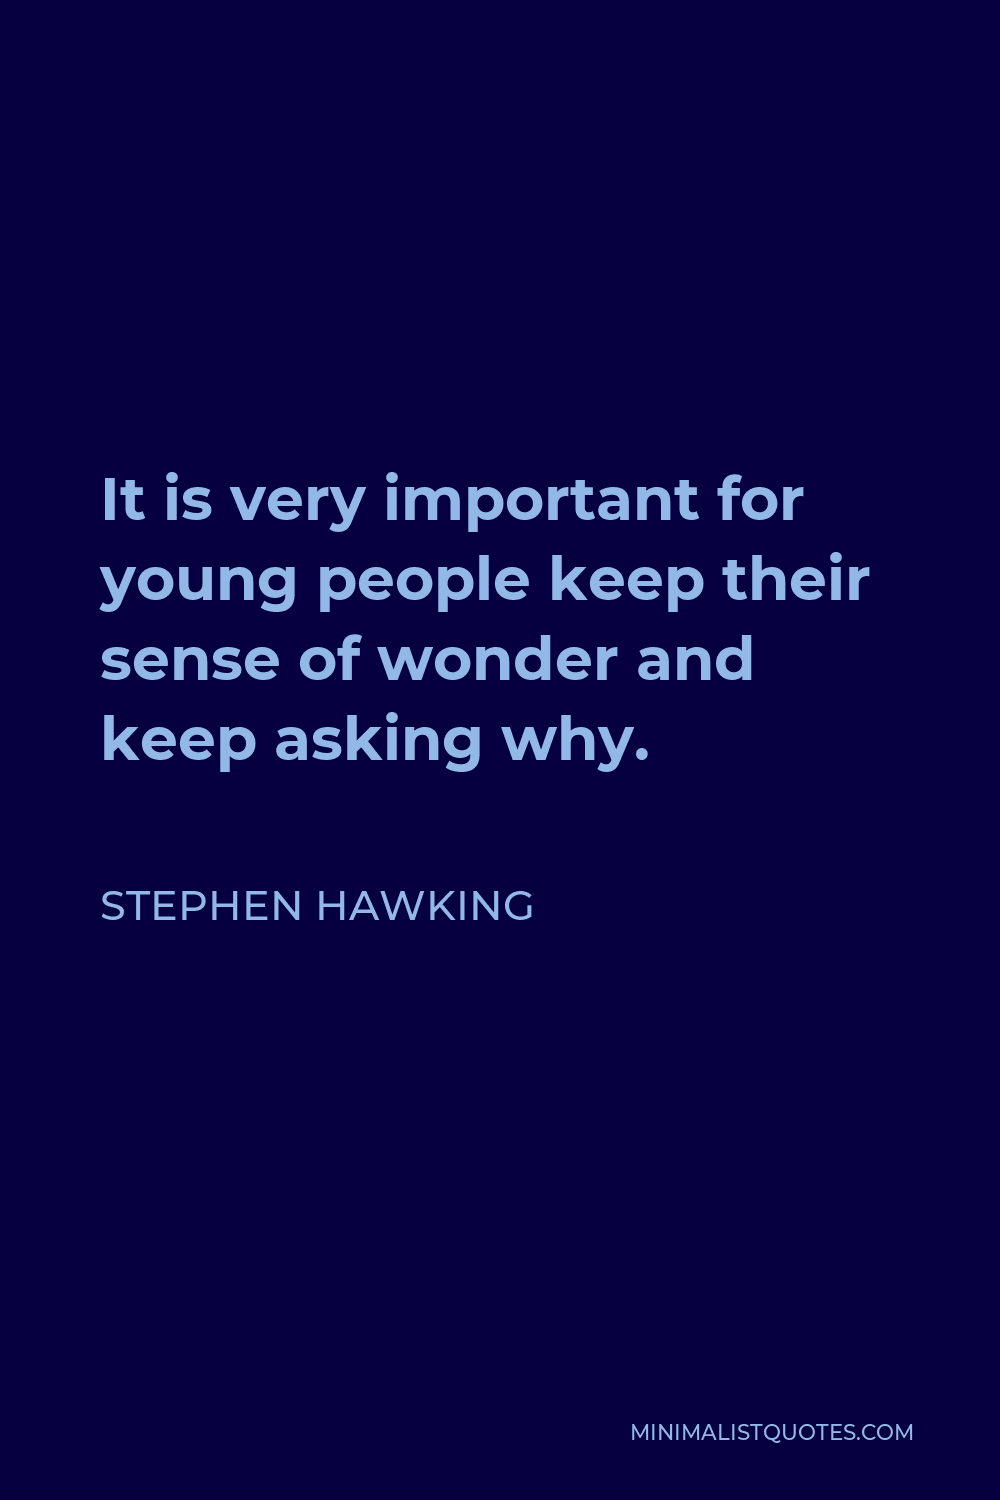 Stephen Hawking Quote - It is very important for young people keep their sense of wonder and keep asking why.